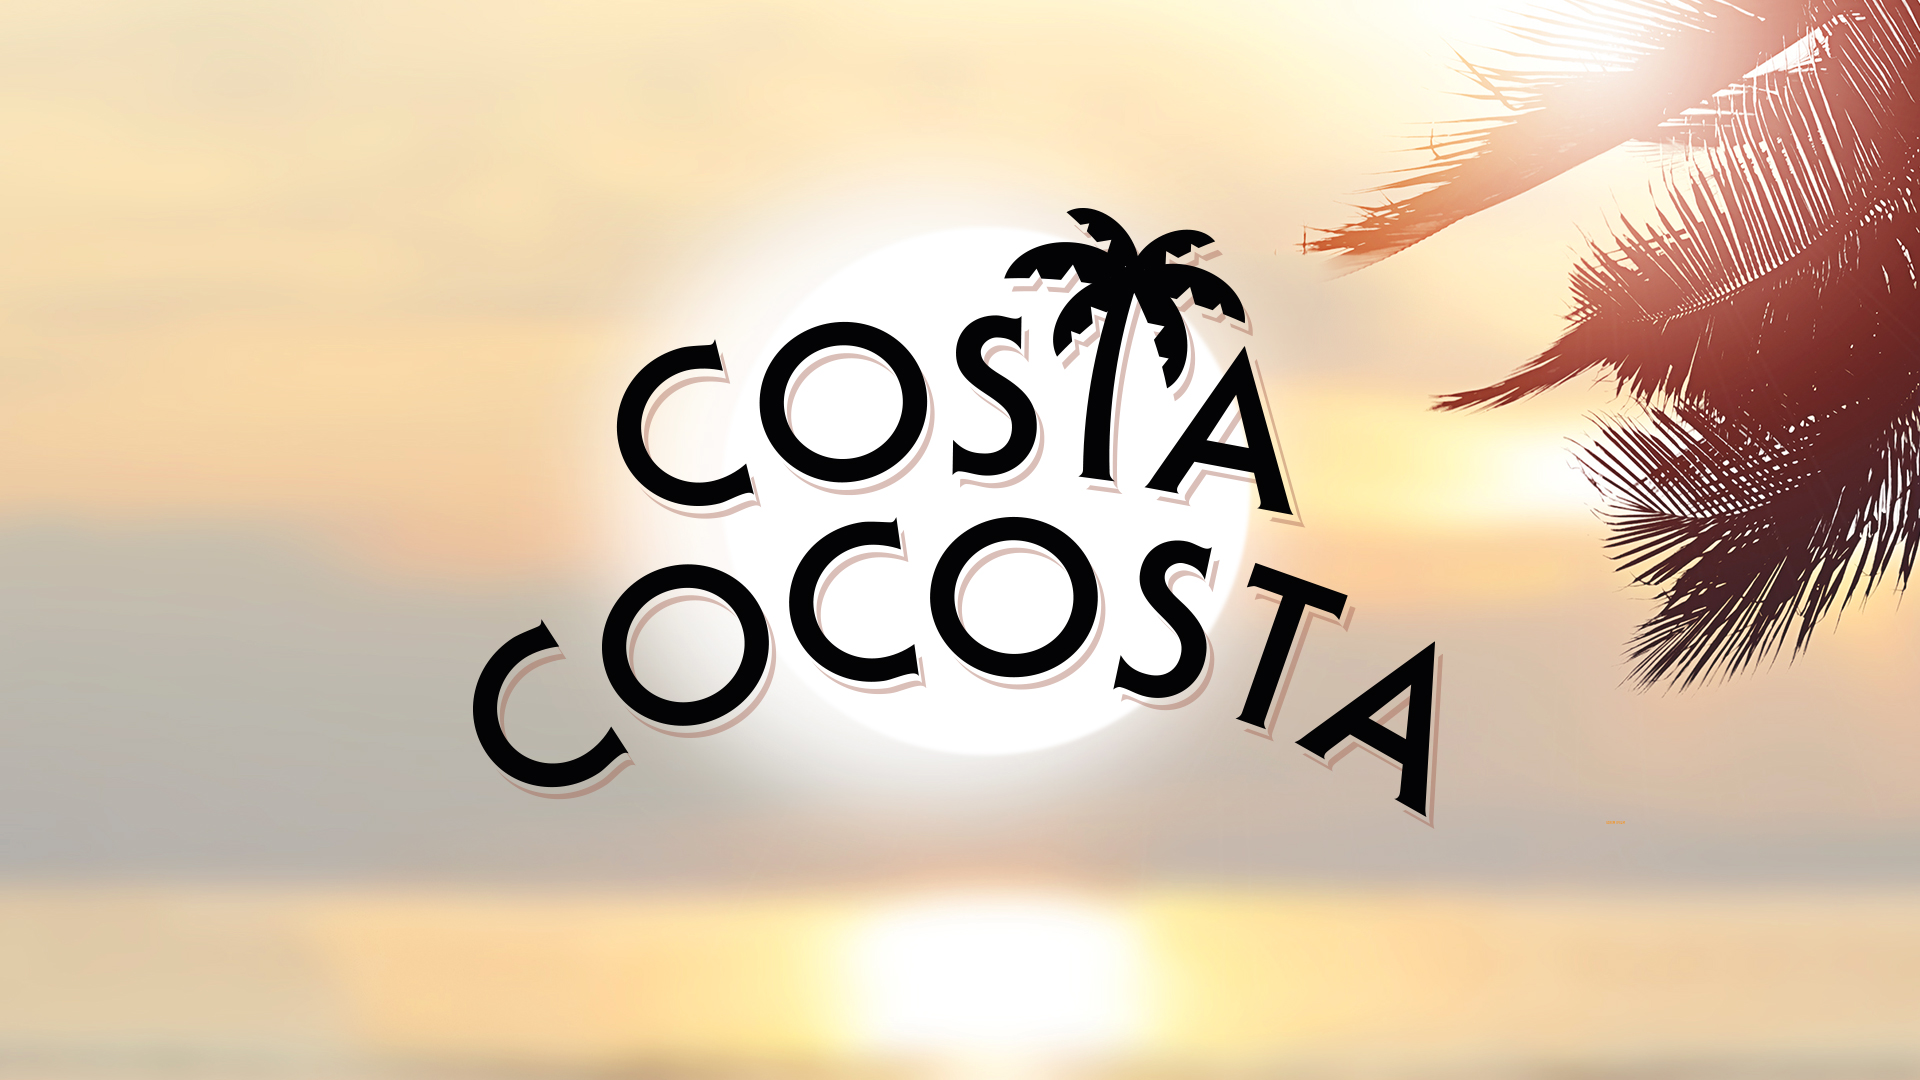 Costa Cocosta Naming and Packaging Design by Wellhead